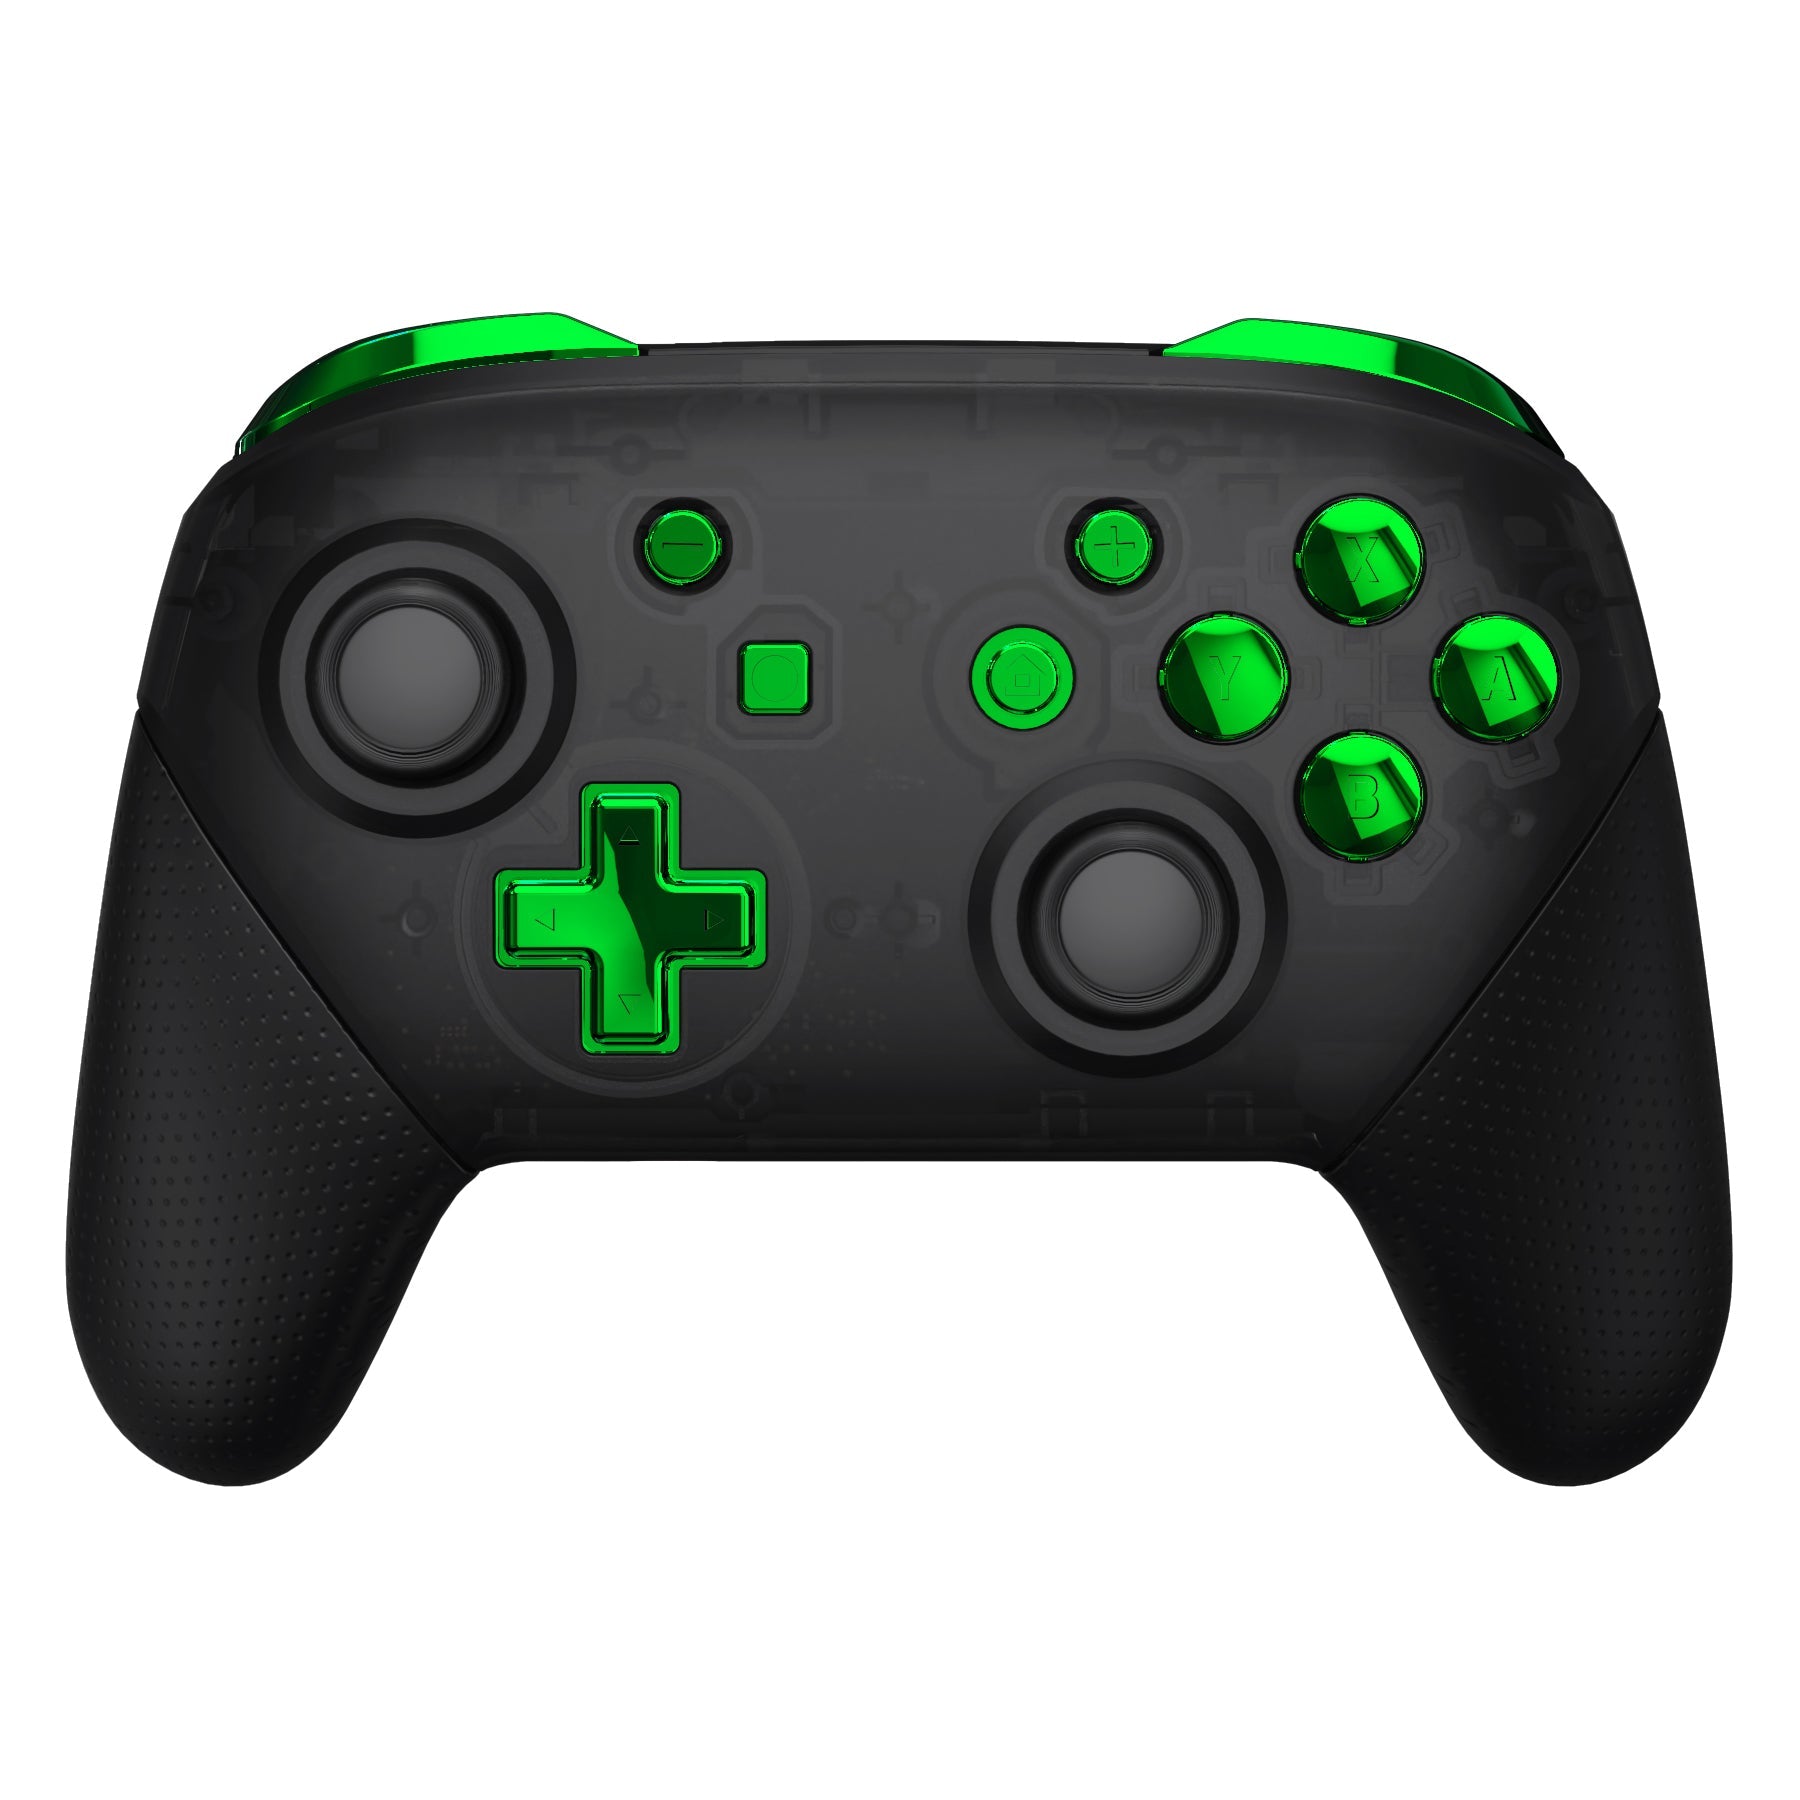 eXtremeRate Retail Chrome Green Repair ABXY D-pad ZR ZL L R Keys for NS Switch Pro Controller, Glossy DIY Replacement Full Set Buttons with Tools for NS Switch Pro - Controller NOT Included - KRD406